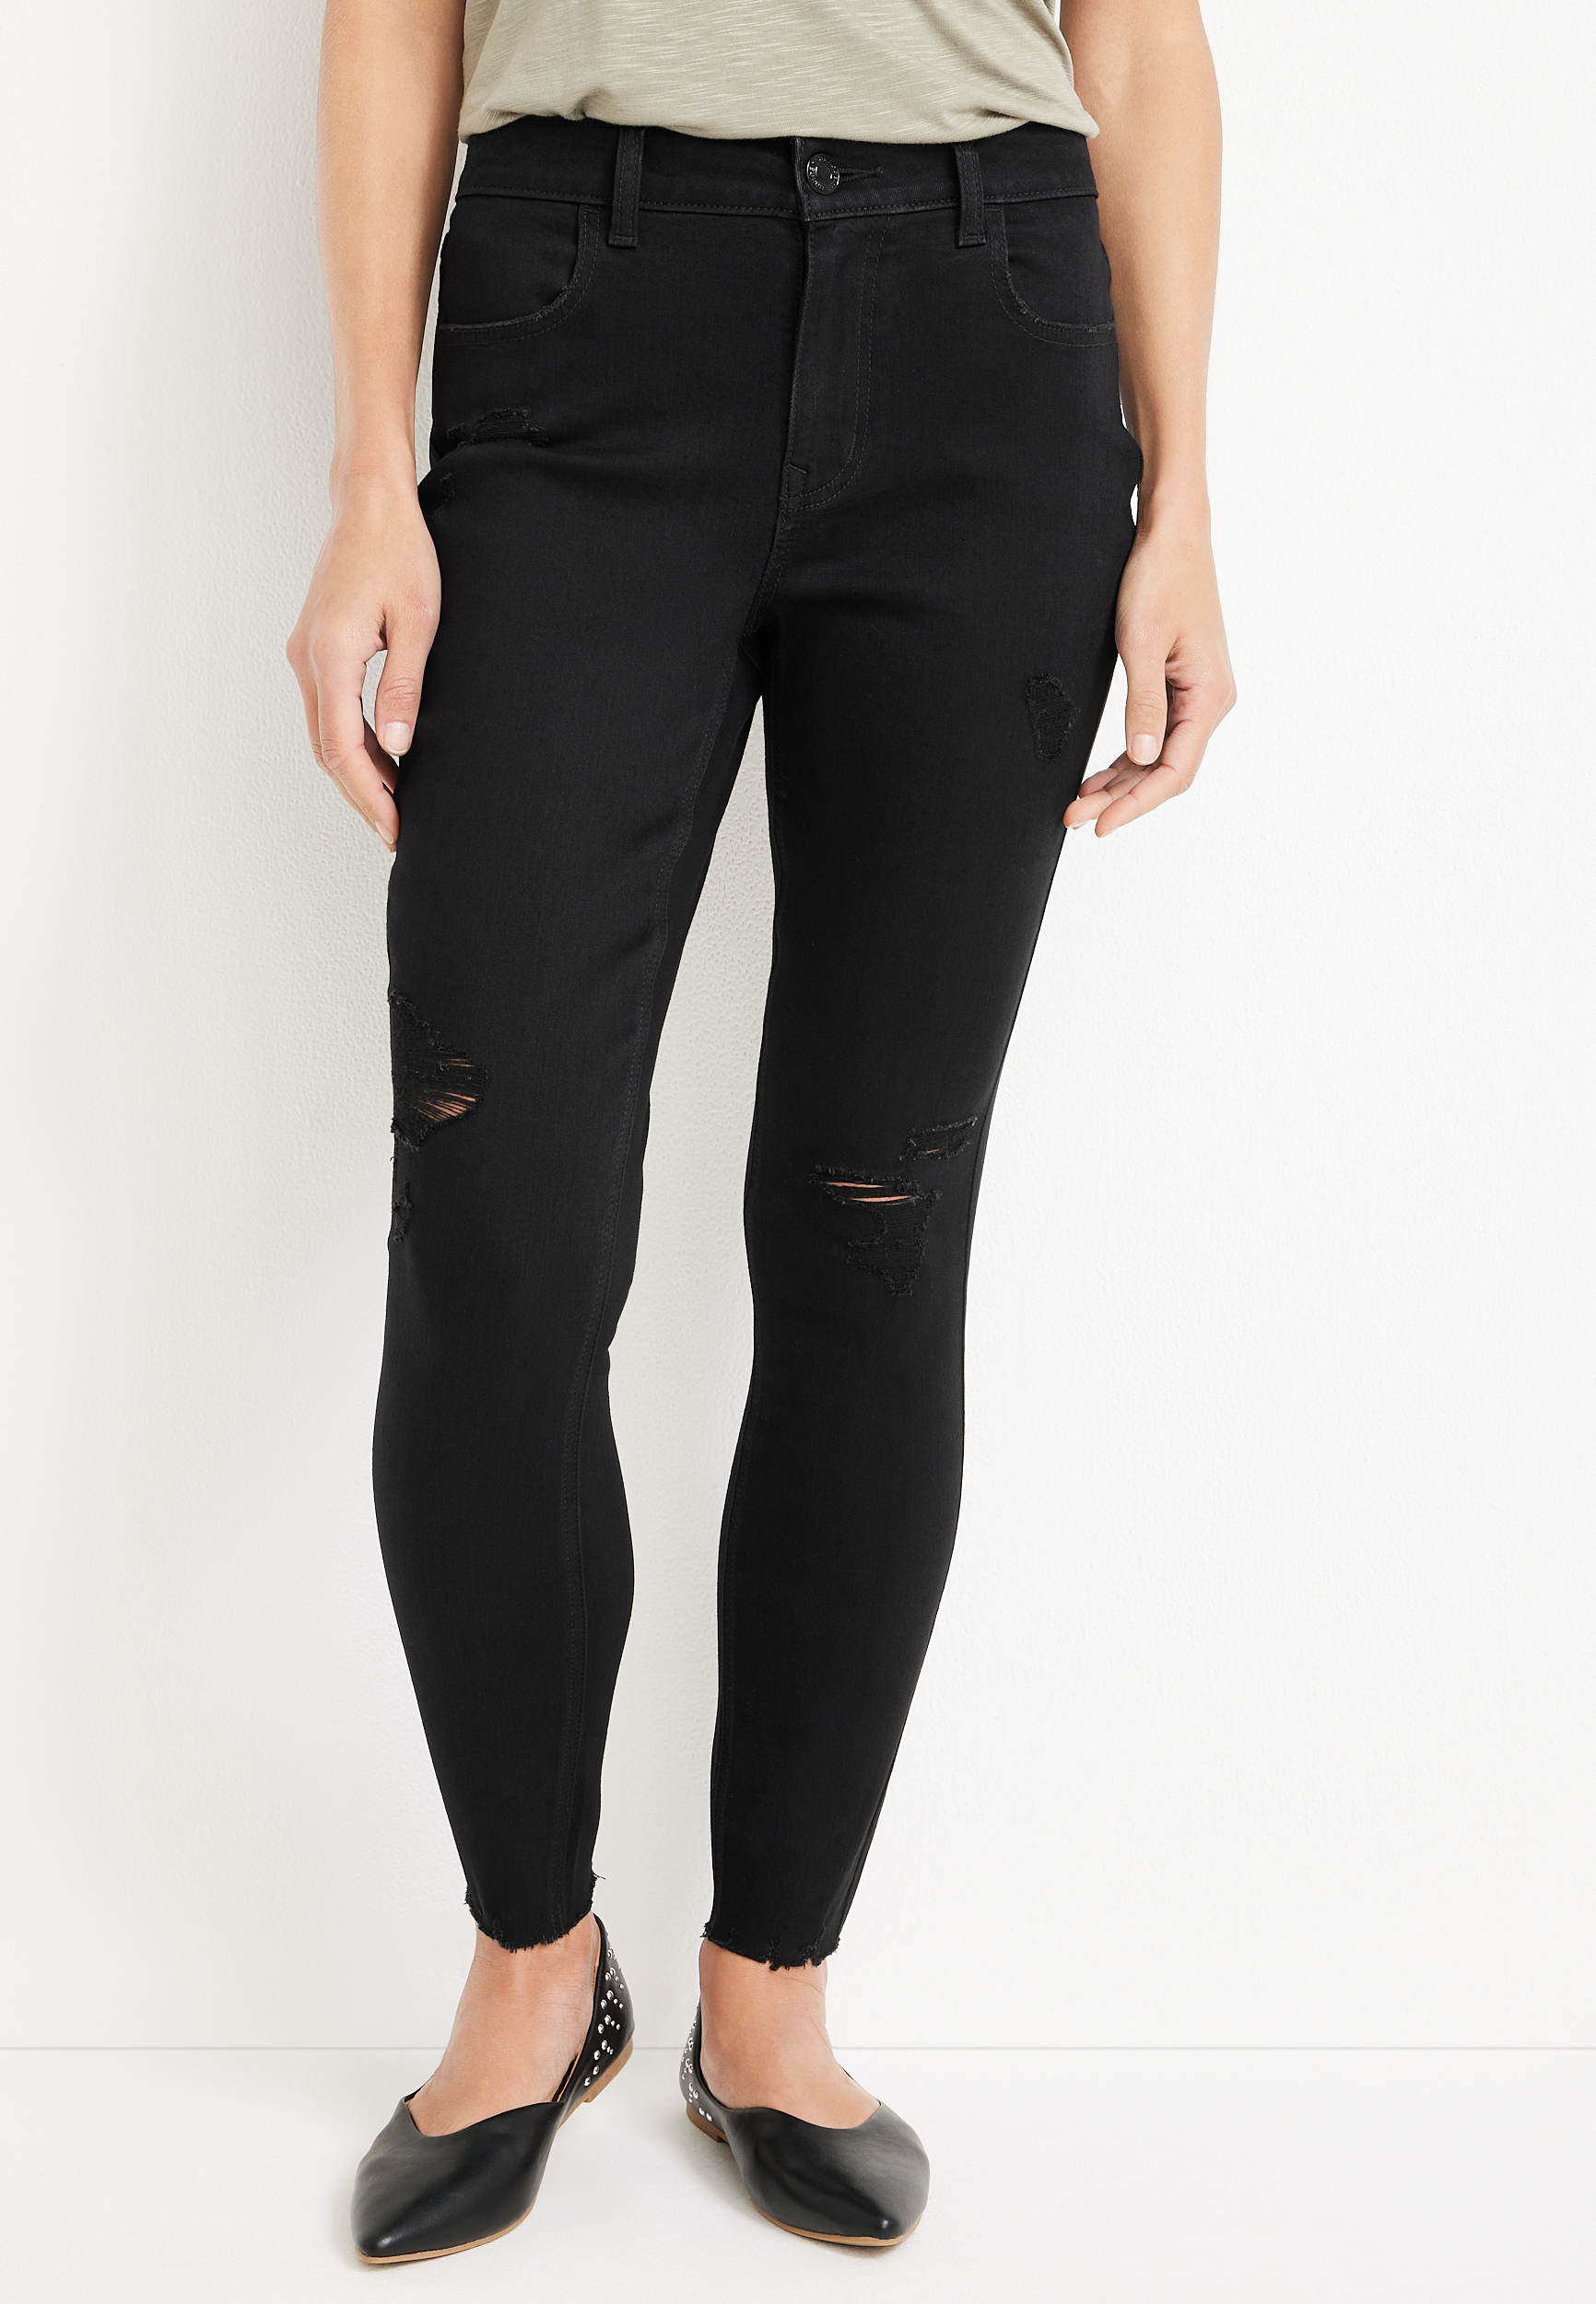 m jeans by maurices™ Black Mid Rise Jegging